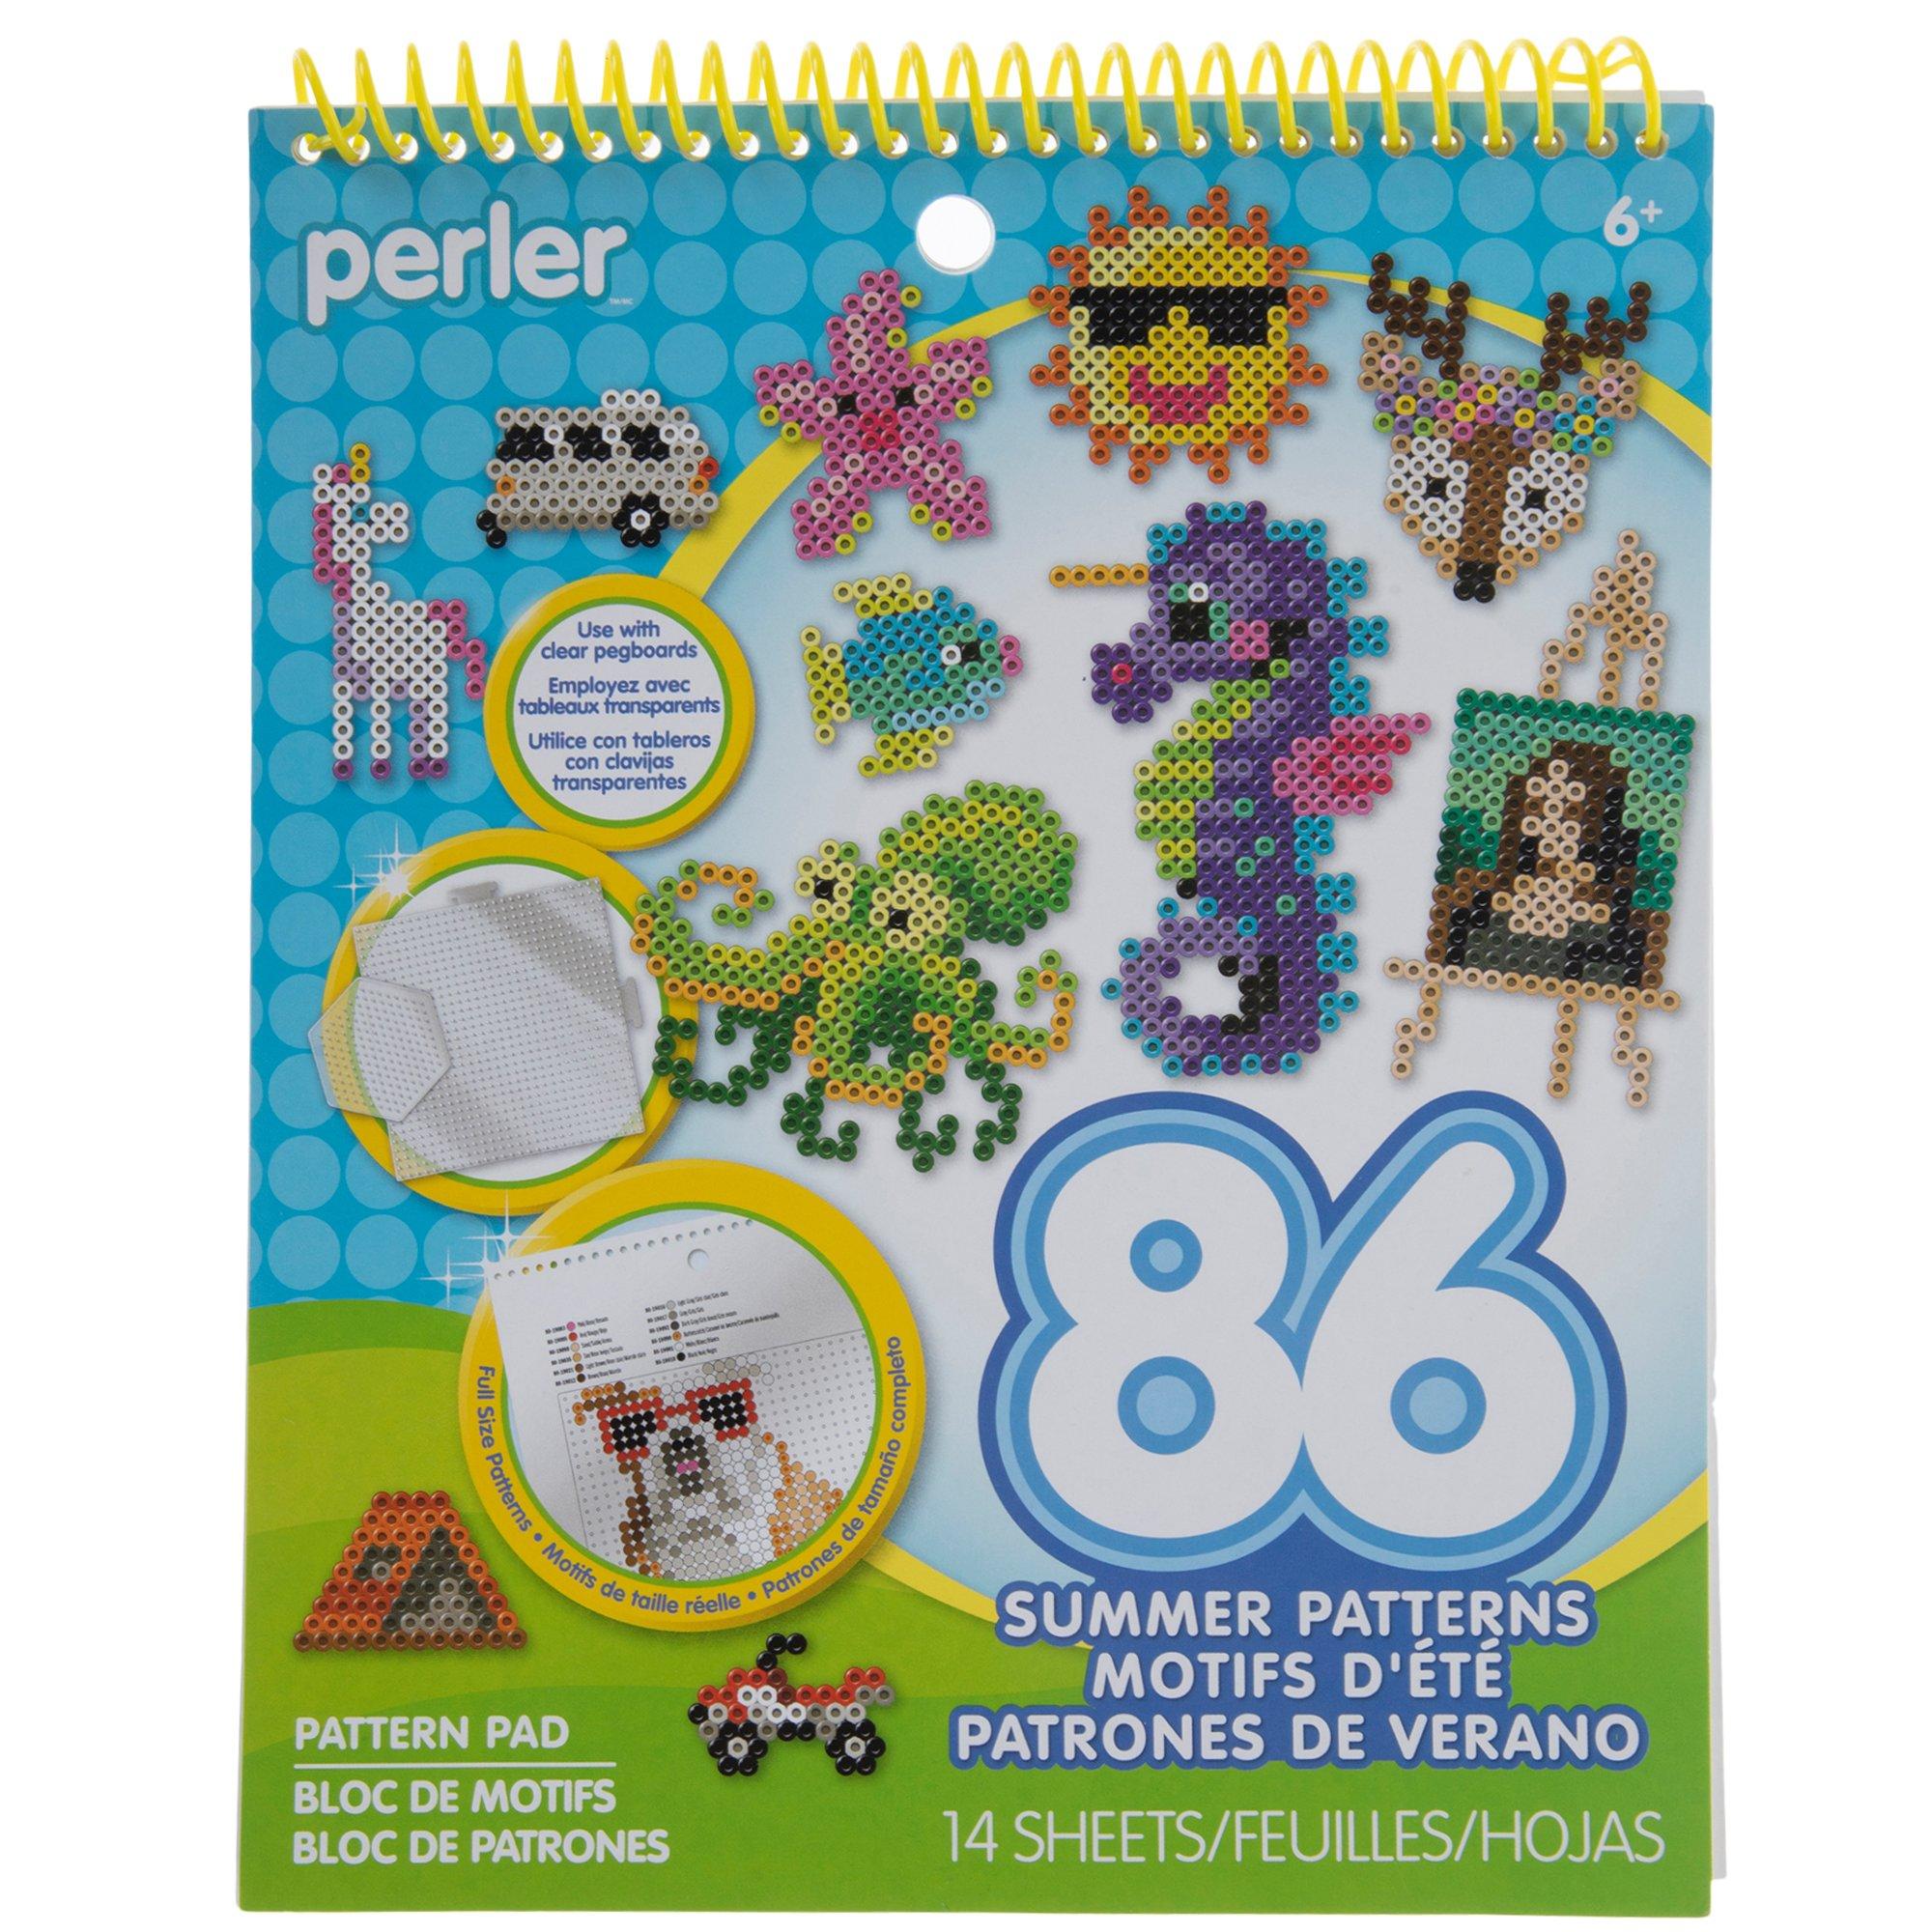 Perler Instruction Pad for Fuse Beads, 86 Patterns, Summertime Fun Piece